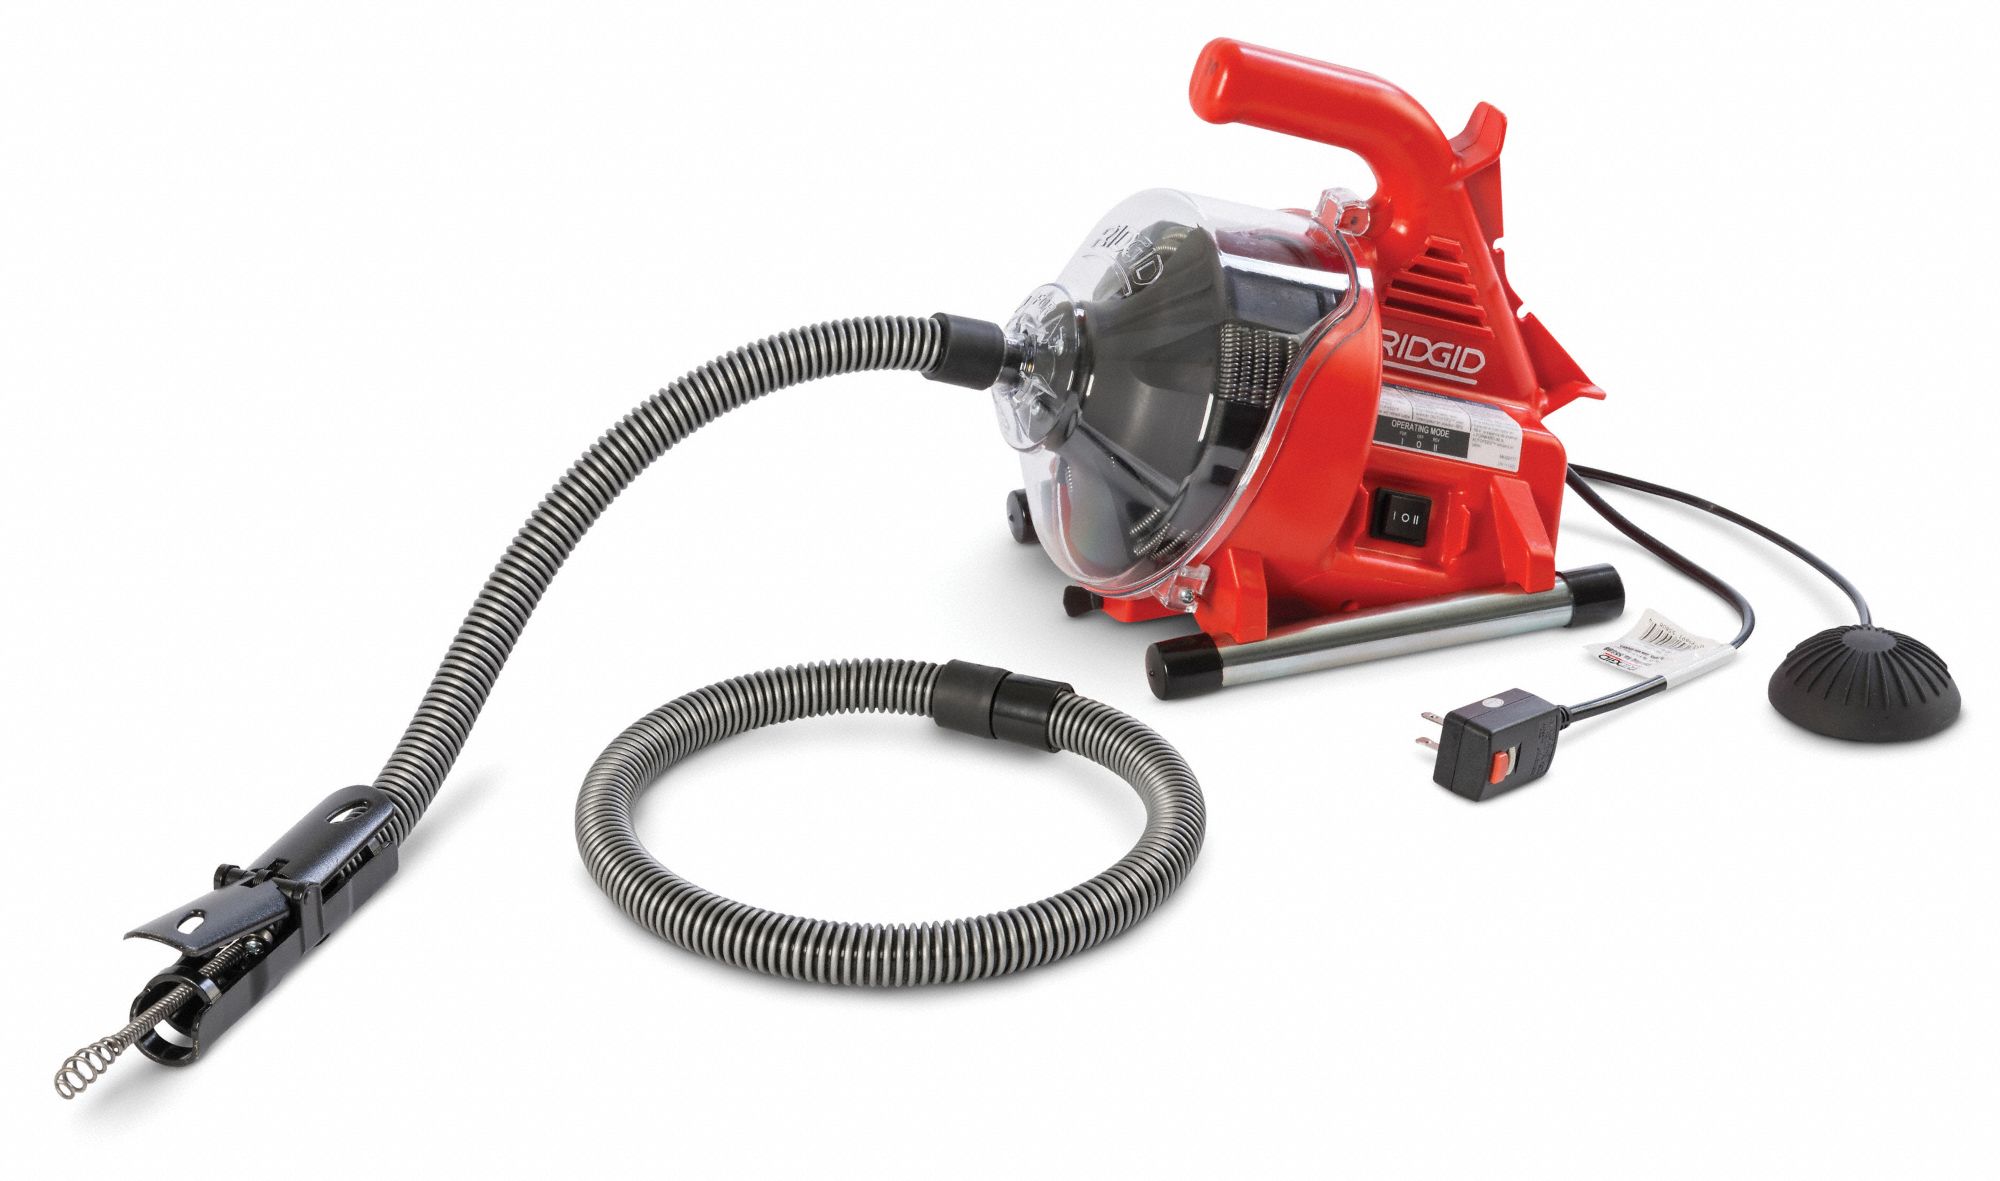 30 ft Ridgid Drain Cleaning Machine Run Corded Electric For Sink or Tub Max 